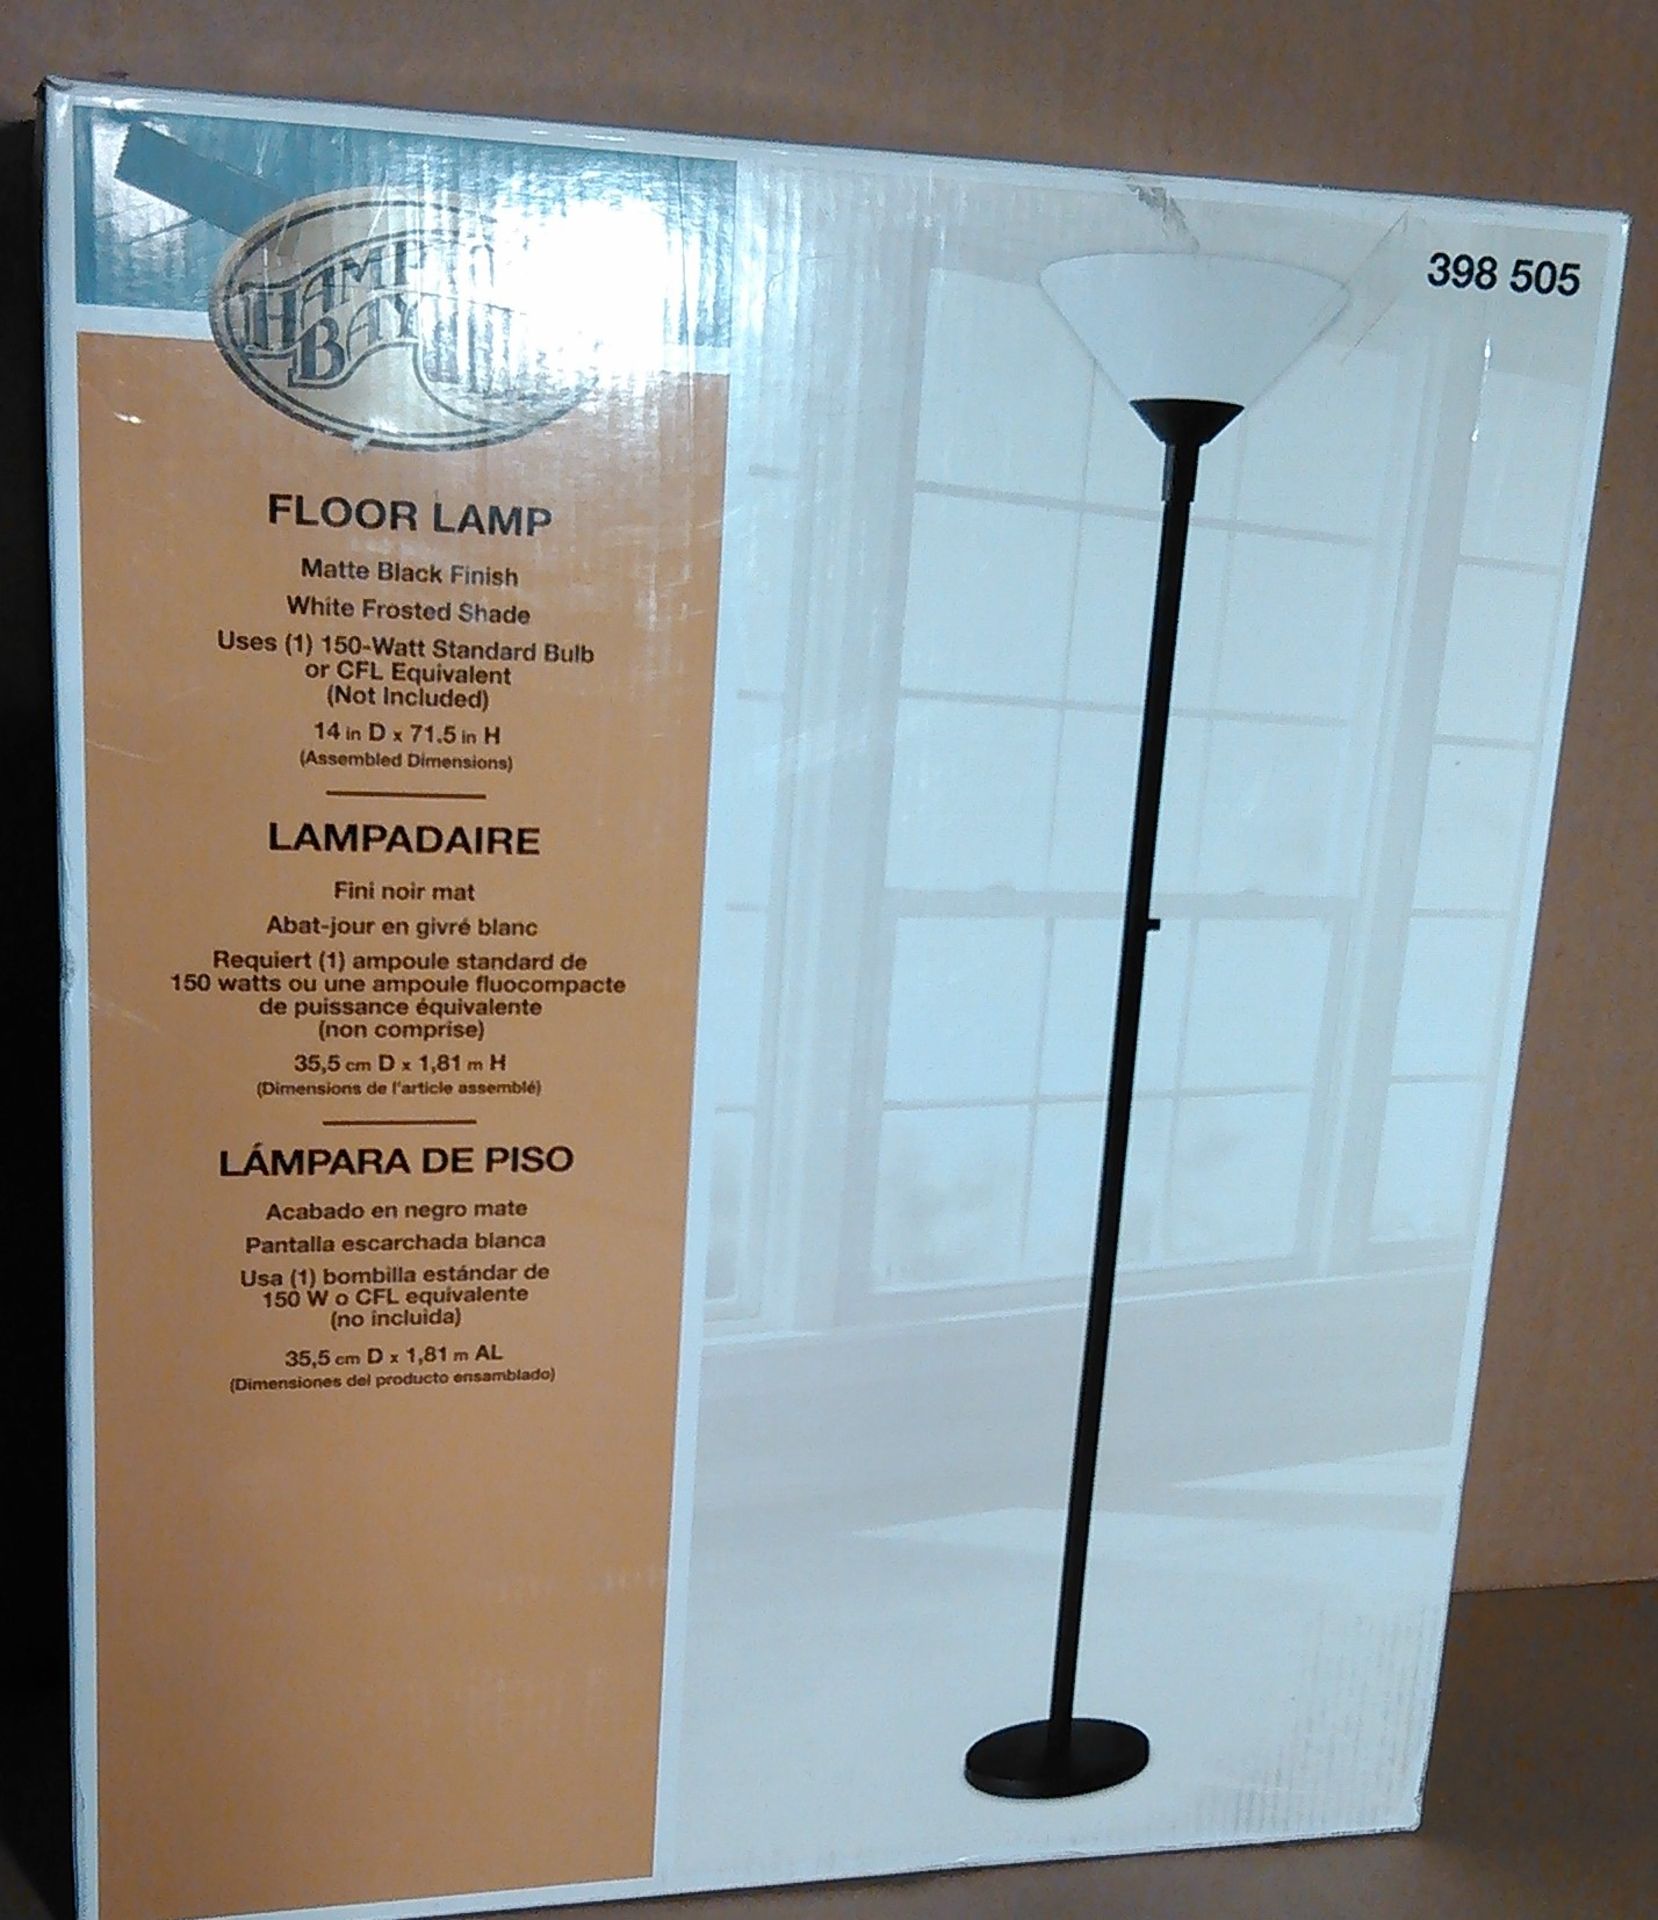 Hampton Bay Floor Lamp, Black Finish with White Shade 14" Deep x 71.5H" High. Retail in Major Home